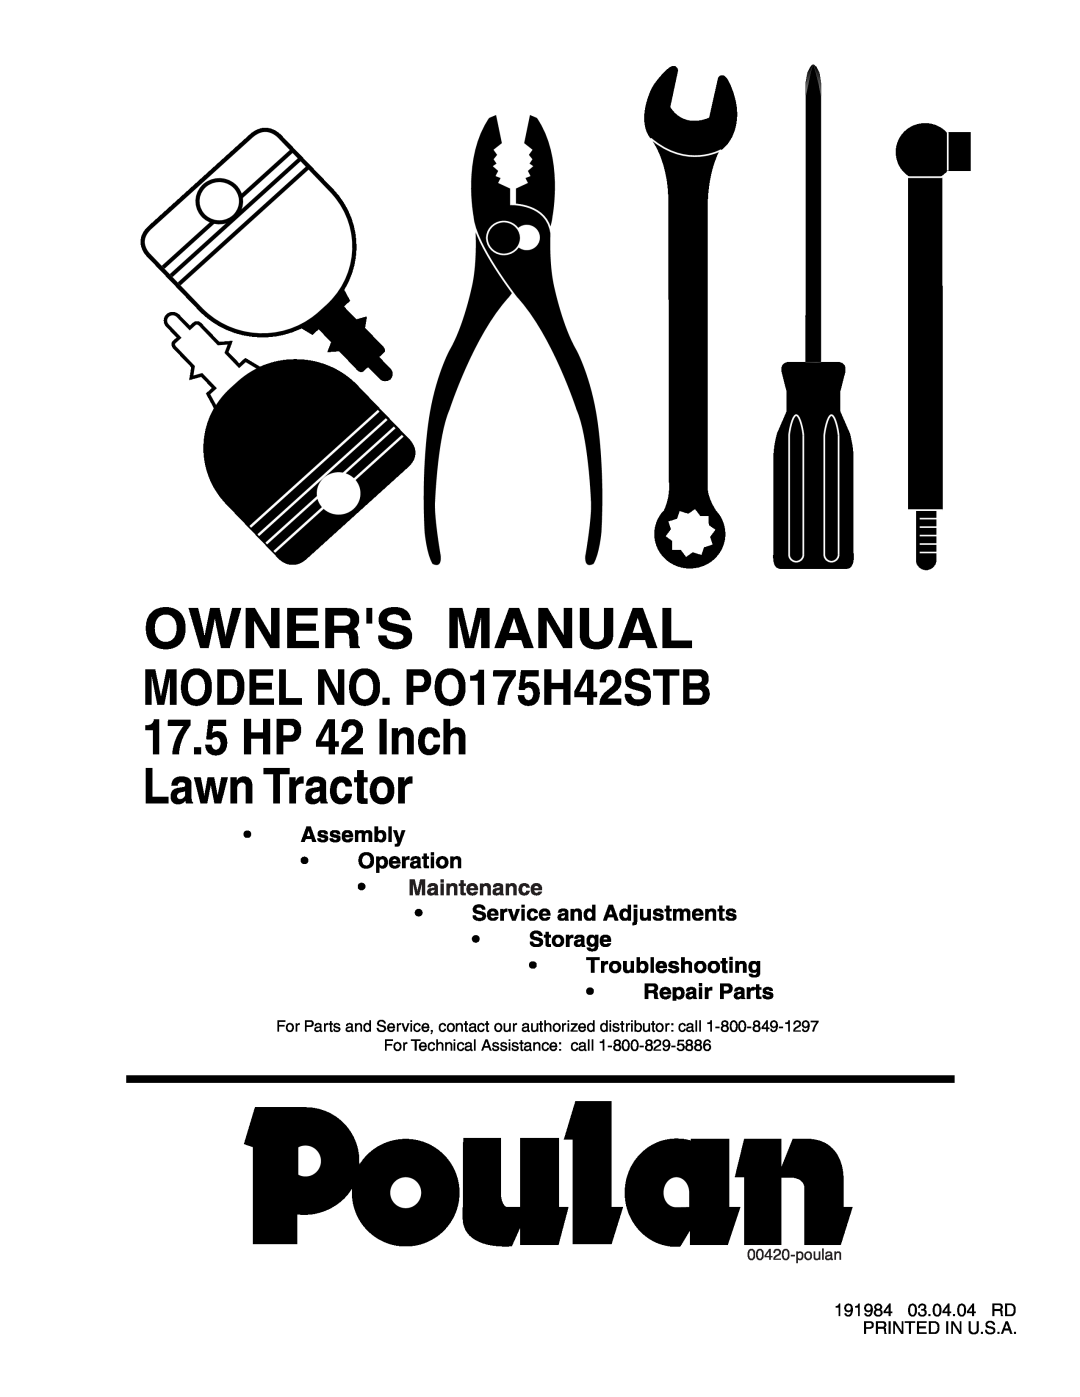 Poulan manual MODEL NO. PO175H42STB 17.5 HP 42 Inch Lawn Tractor, 191984 03.04.04 RD PRINTED IN U.S.A 